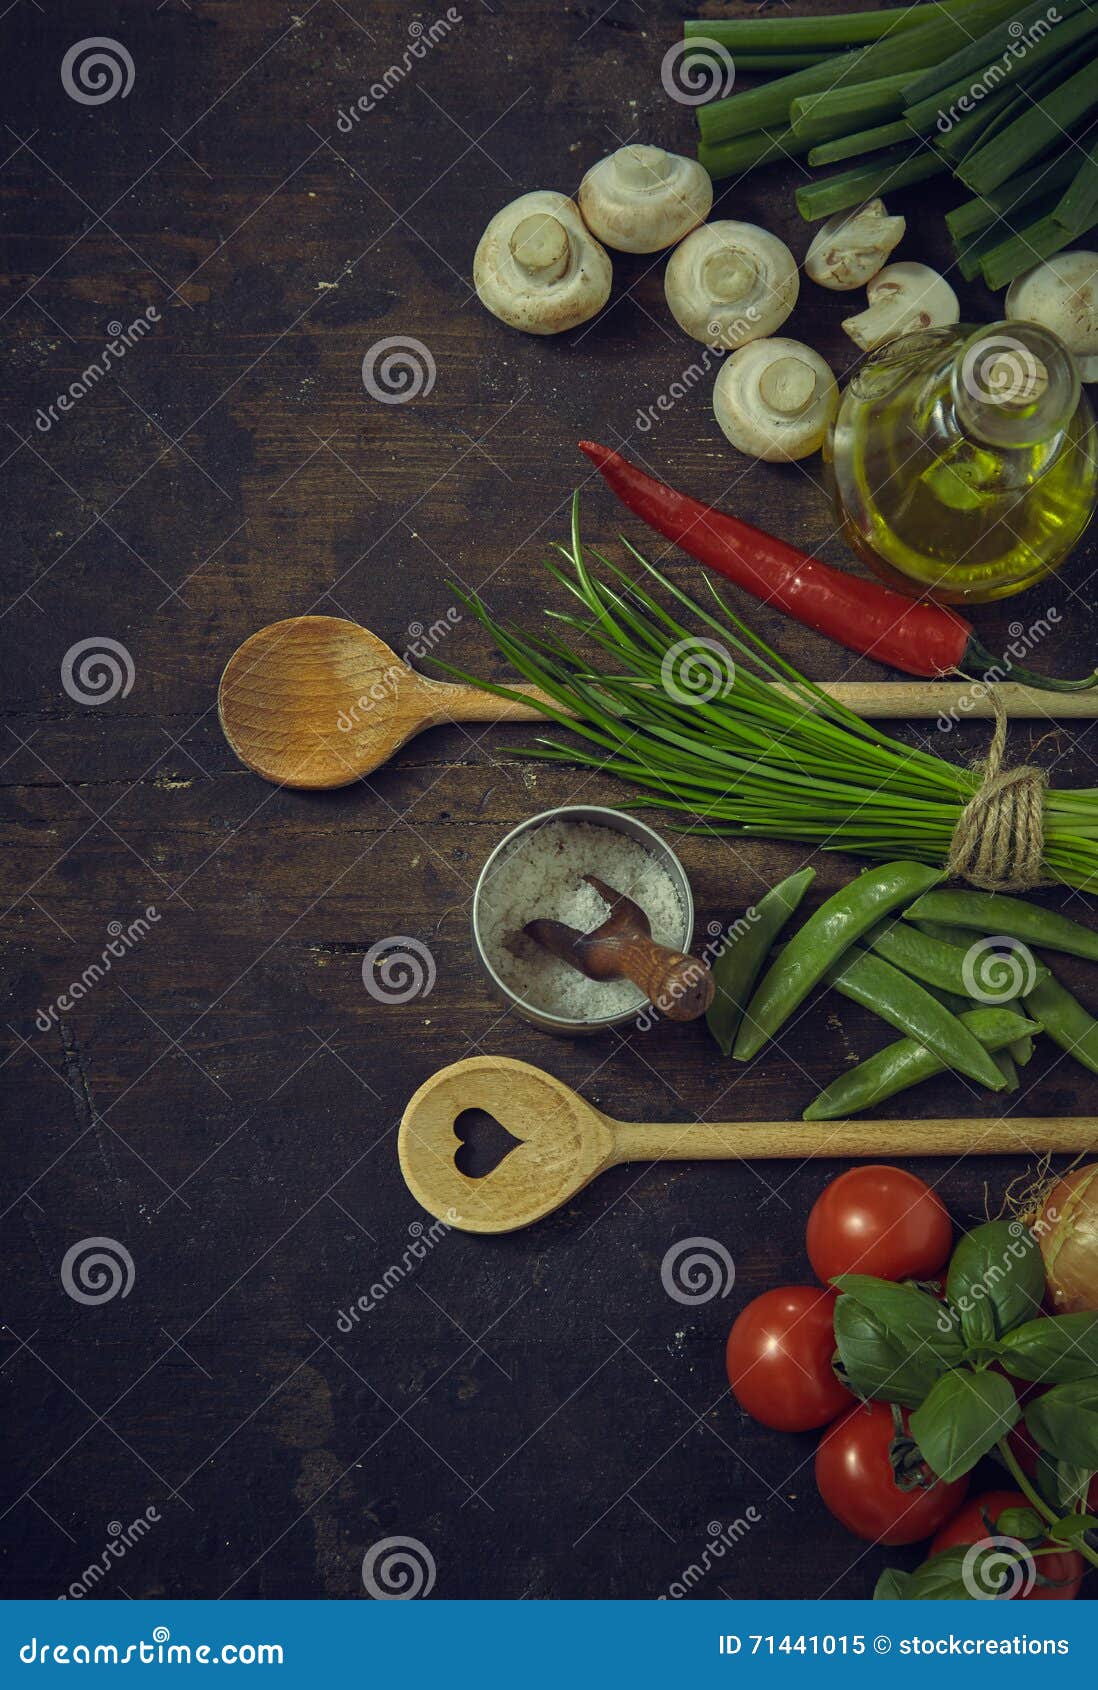 Wooden Spoons with Fresh Vegetables and Seasonings Stock Image - Image ...